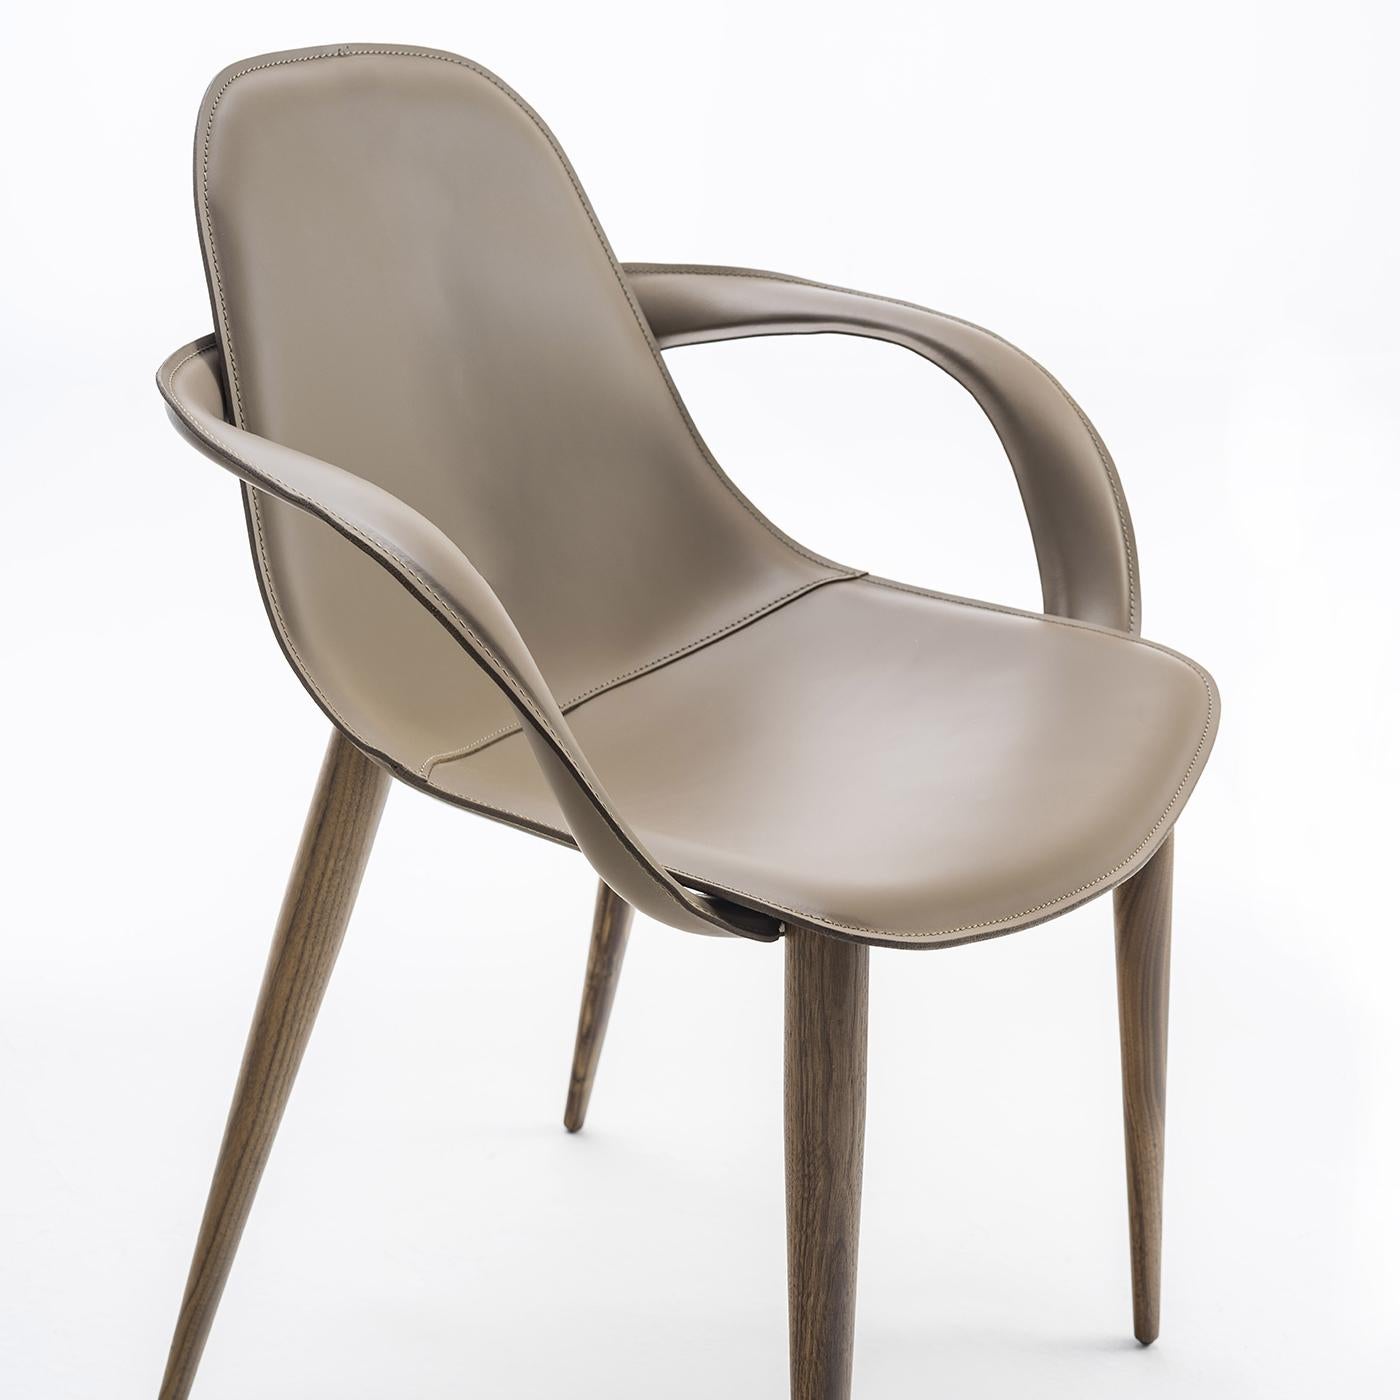 Modern Couture Wooden-Legged Chair by Stefano Bigi For Sale